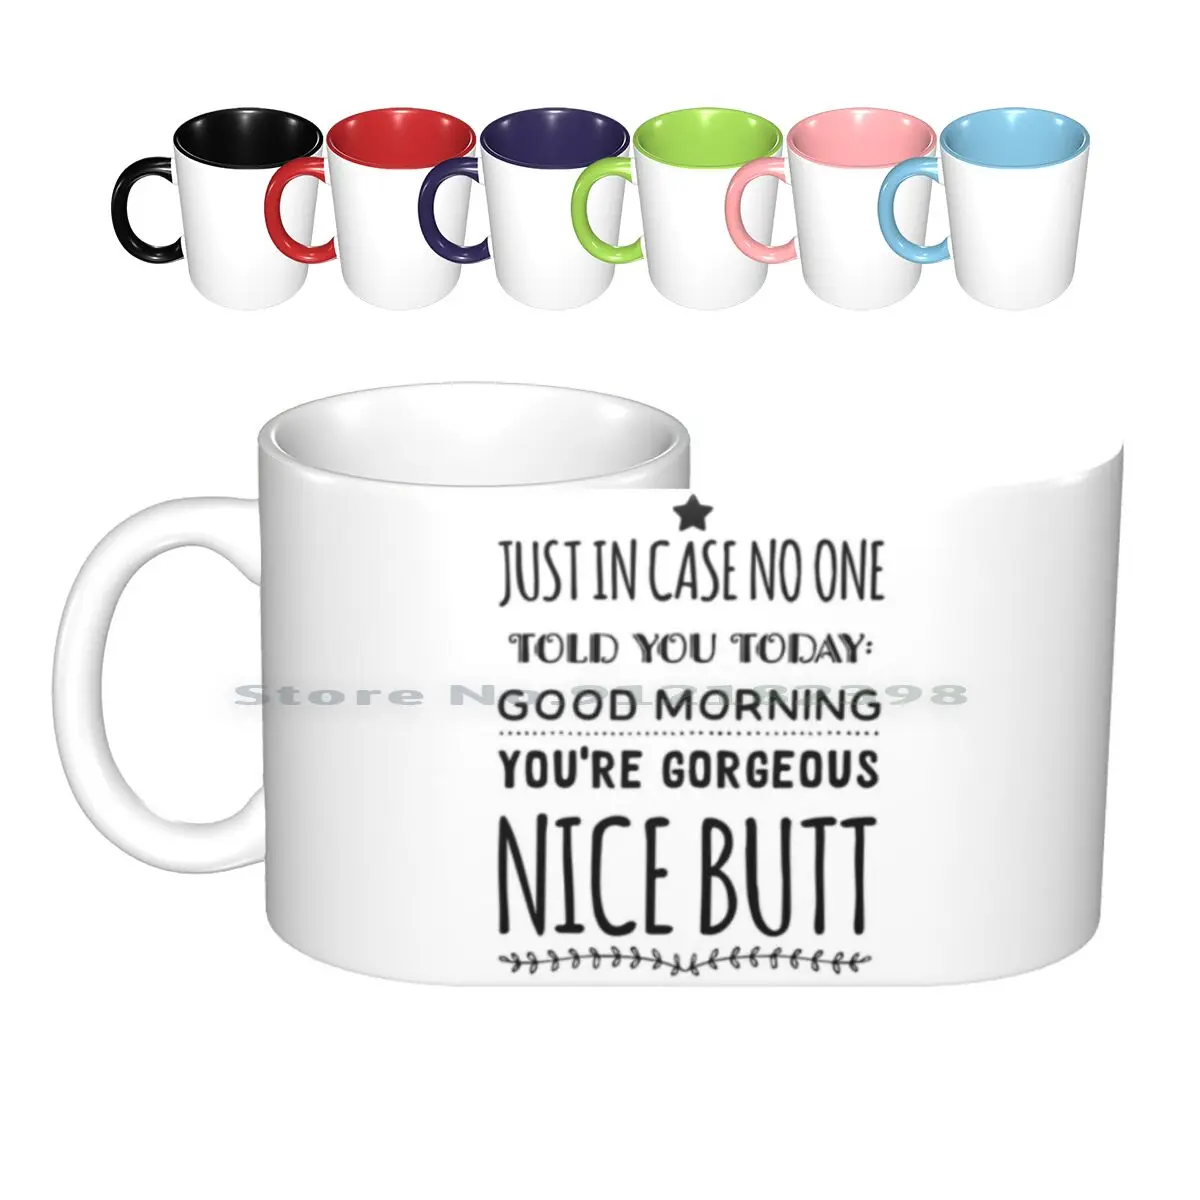 

Just In Case No One Told You Today Good Morning You're Gorgeous Nice Butt Ceramic Mugs Coffee Cups Milk Tea Mug Just In Case No